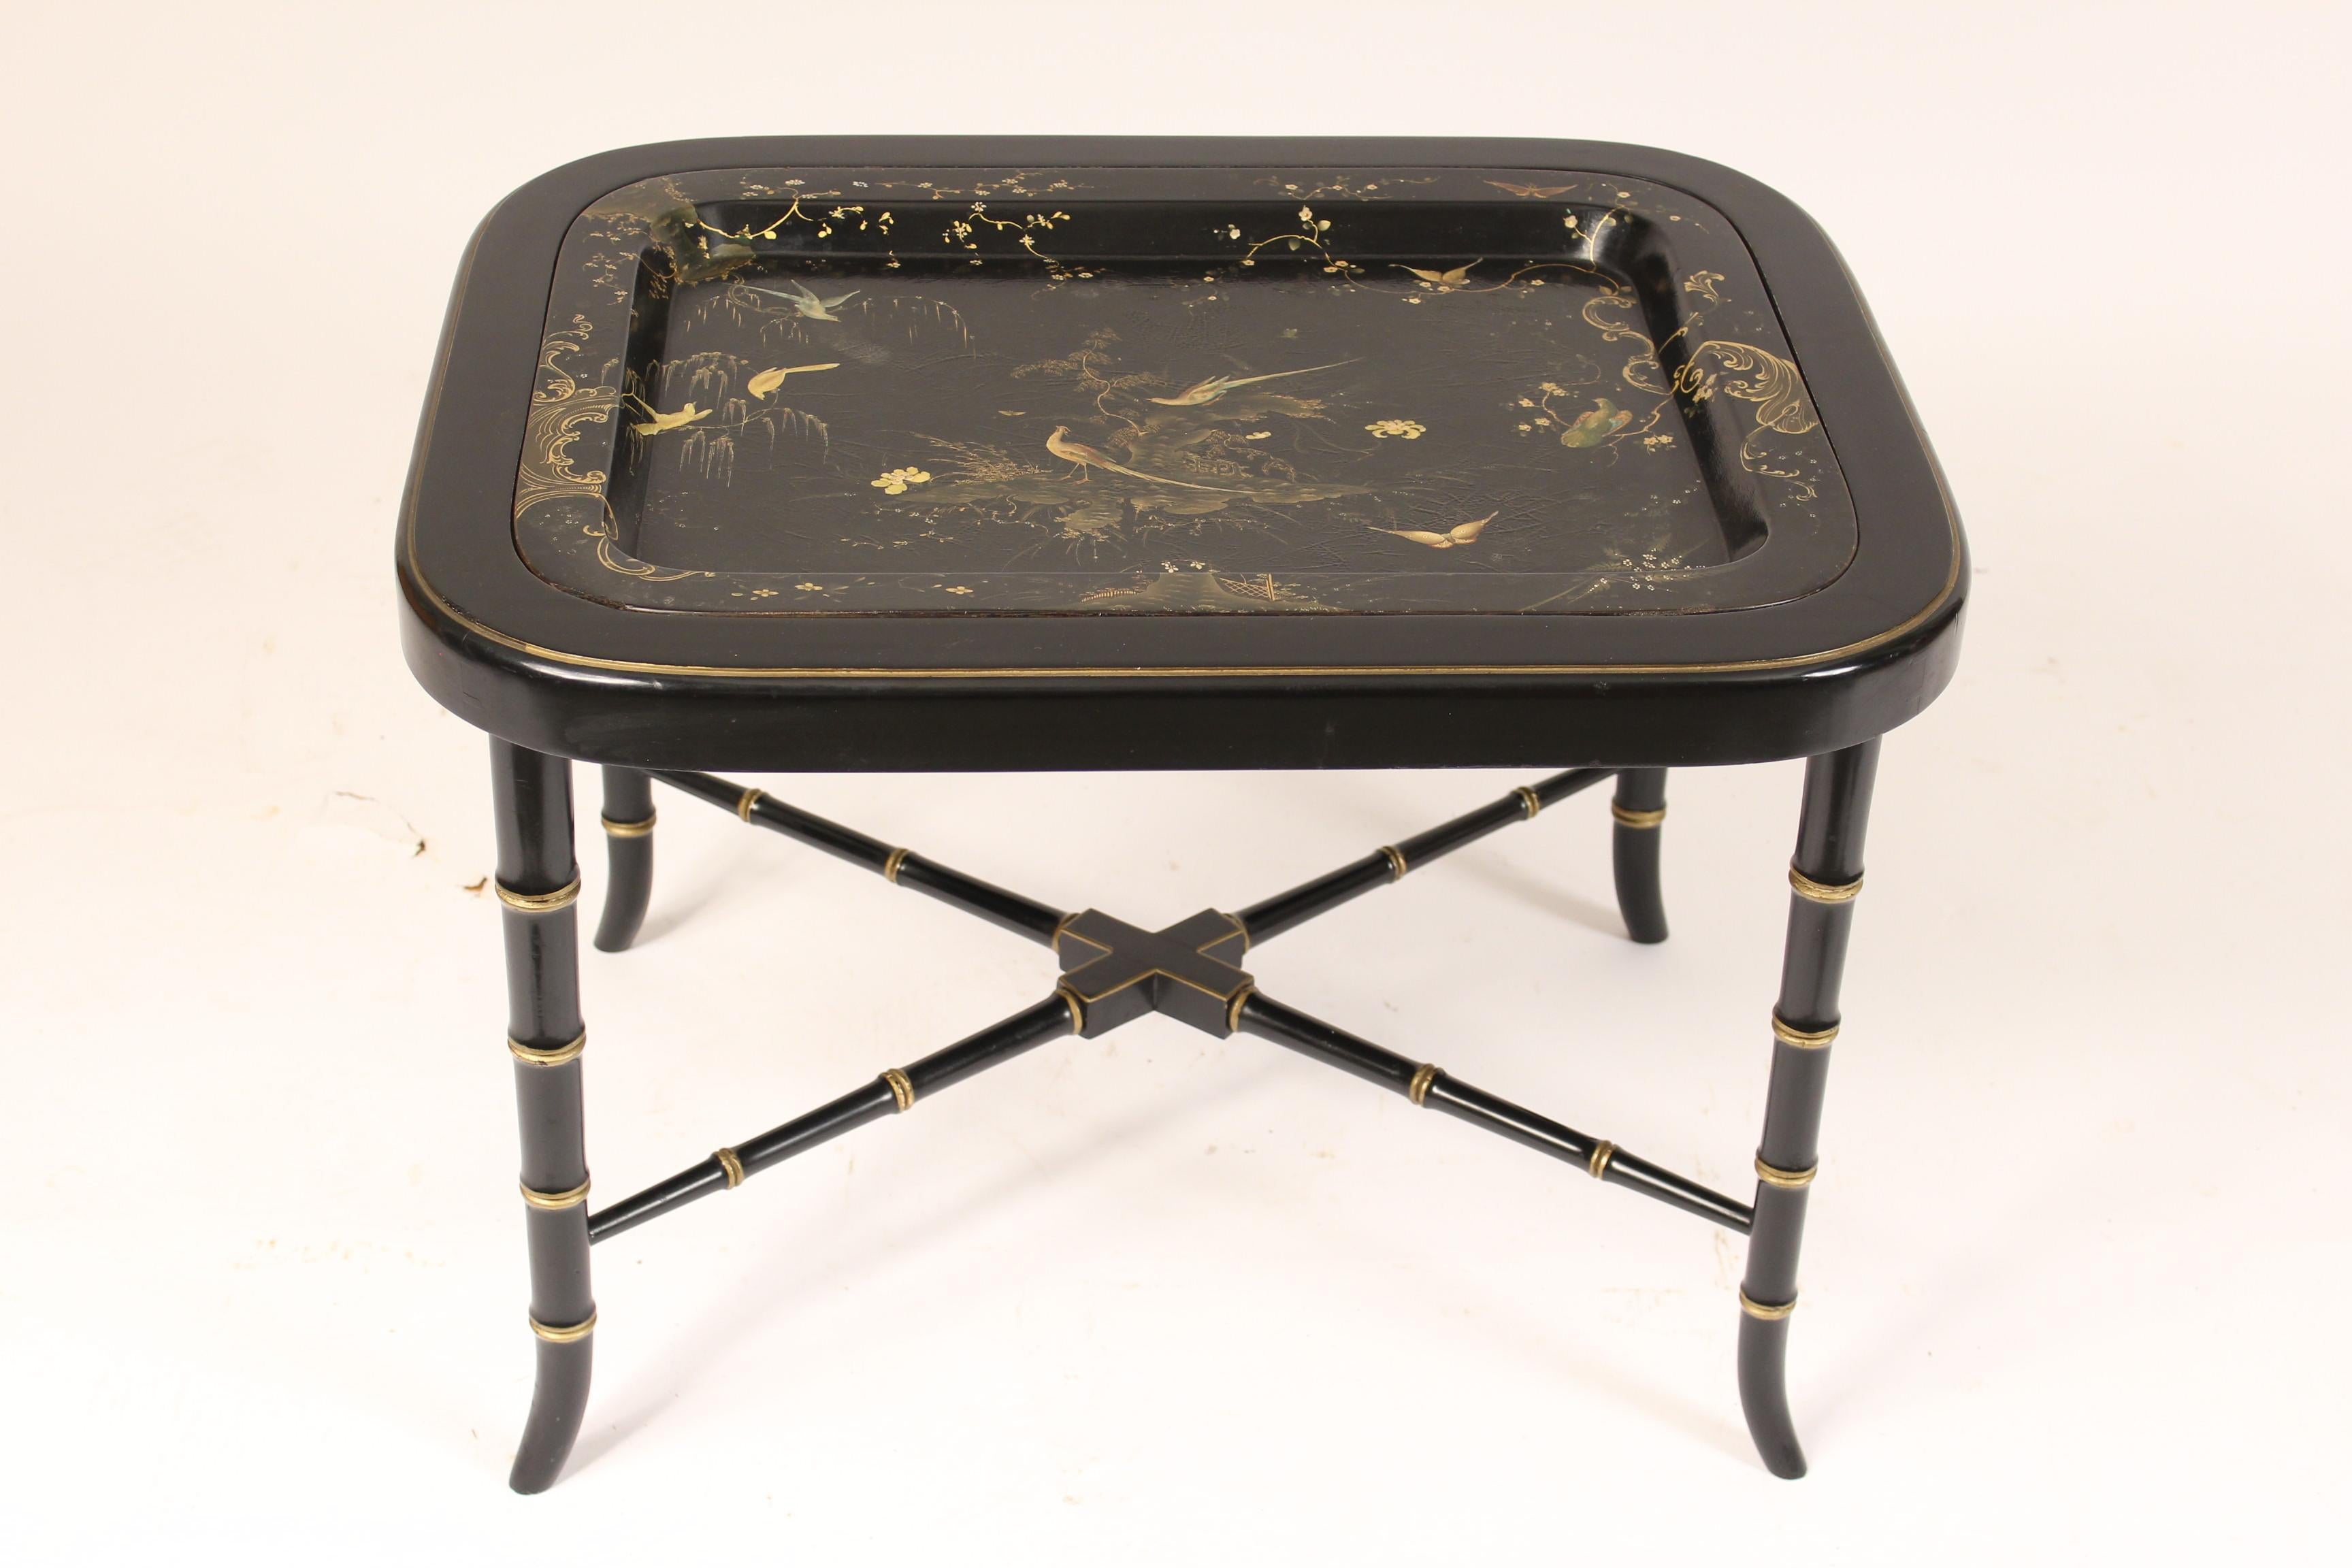 English regency style black lacquer and gilt decorated papier mâché tray table. The gilt decorated and painted papier mâché tray was made circa 1900. The regency style bamboo turned and gilt decorated base was made circa late 20th century. The